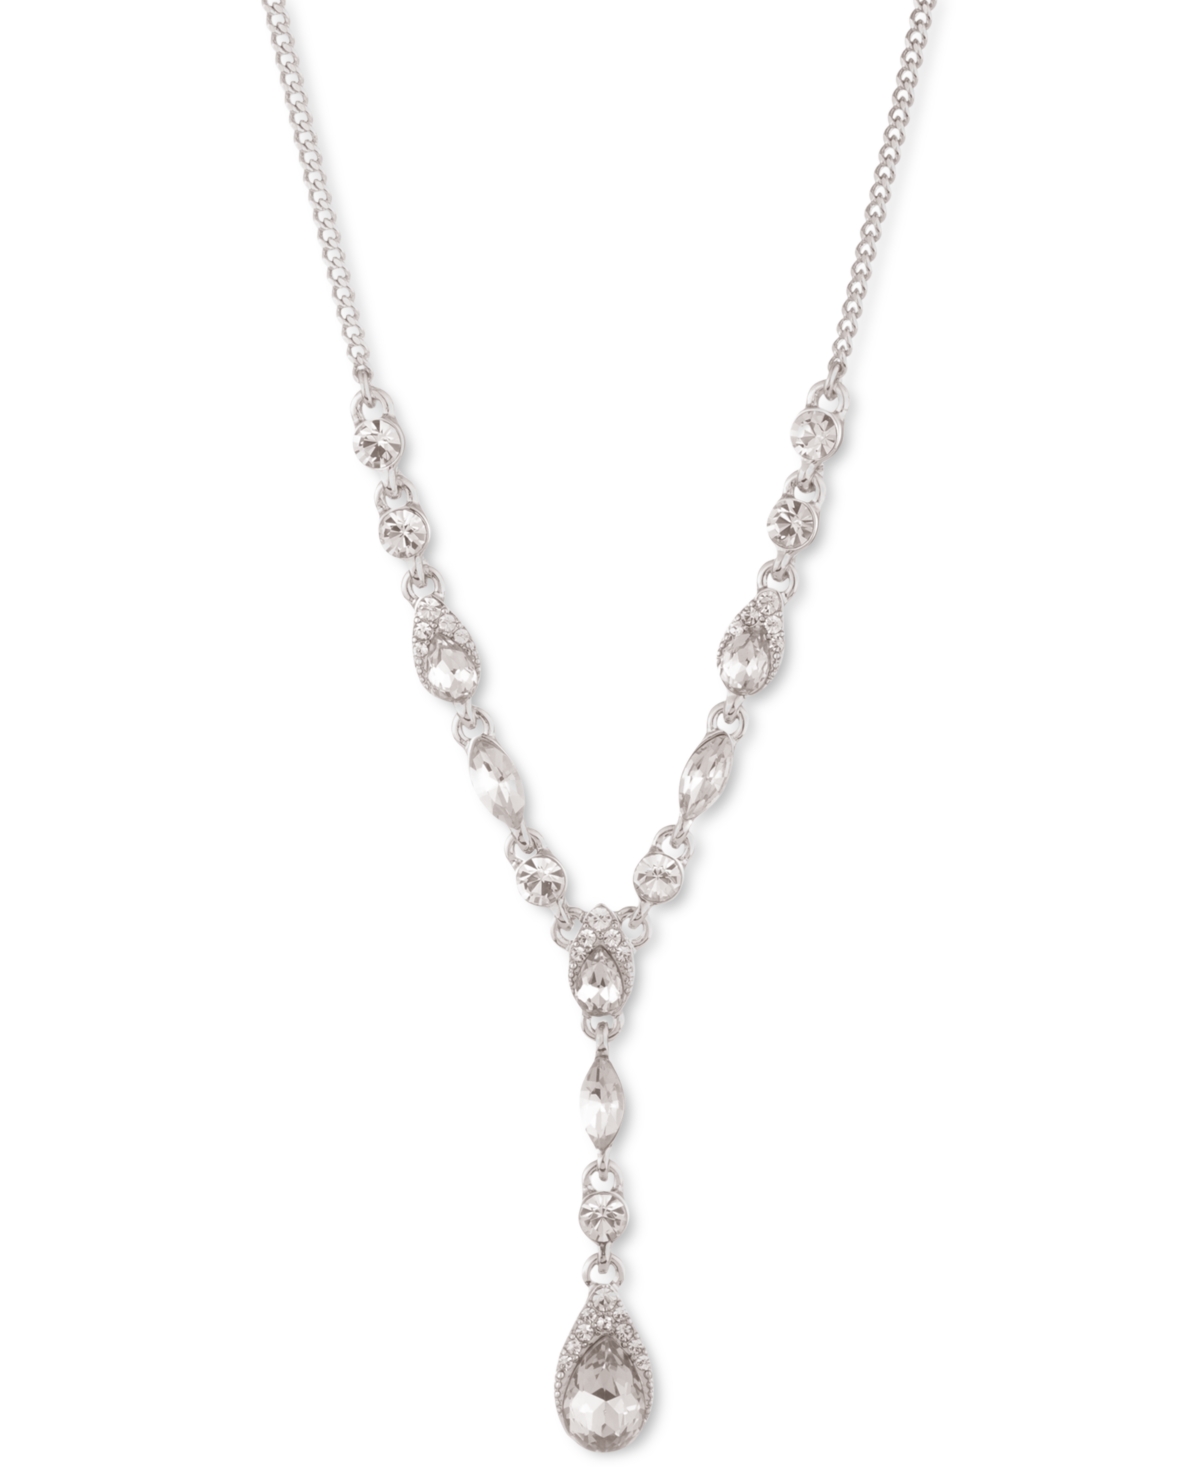 Pear-Shape Crystal Lariat Necklace, 16" + 3" extender - Silver